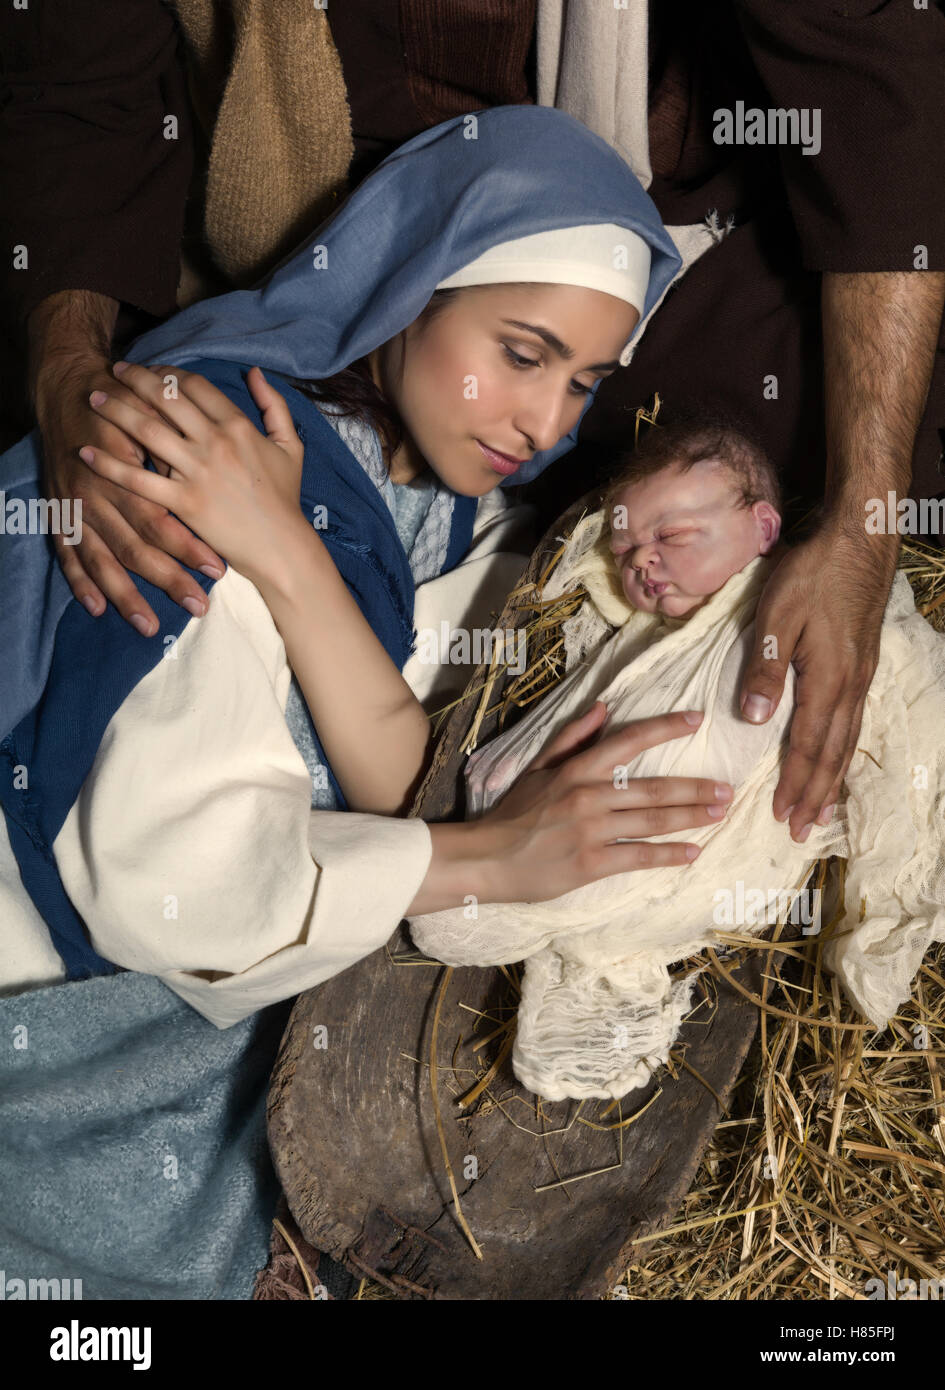 live-christmas-nativity-scene-in-an-old-barn-reenactment-play-with